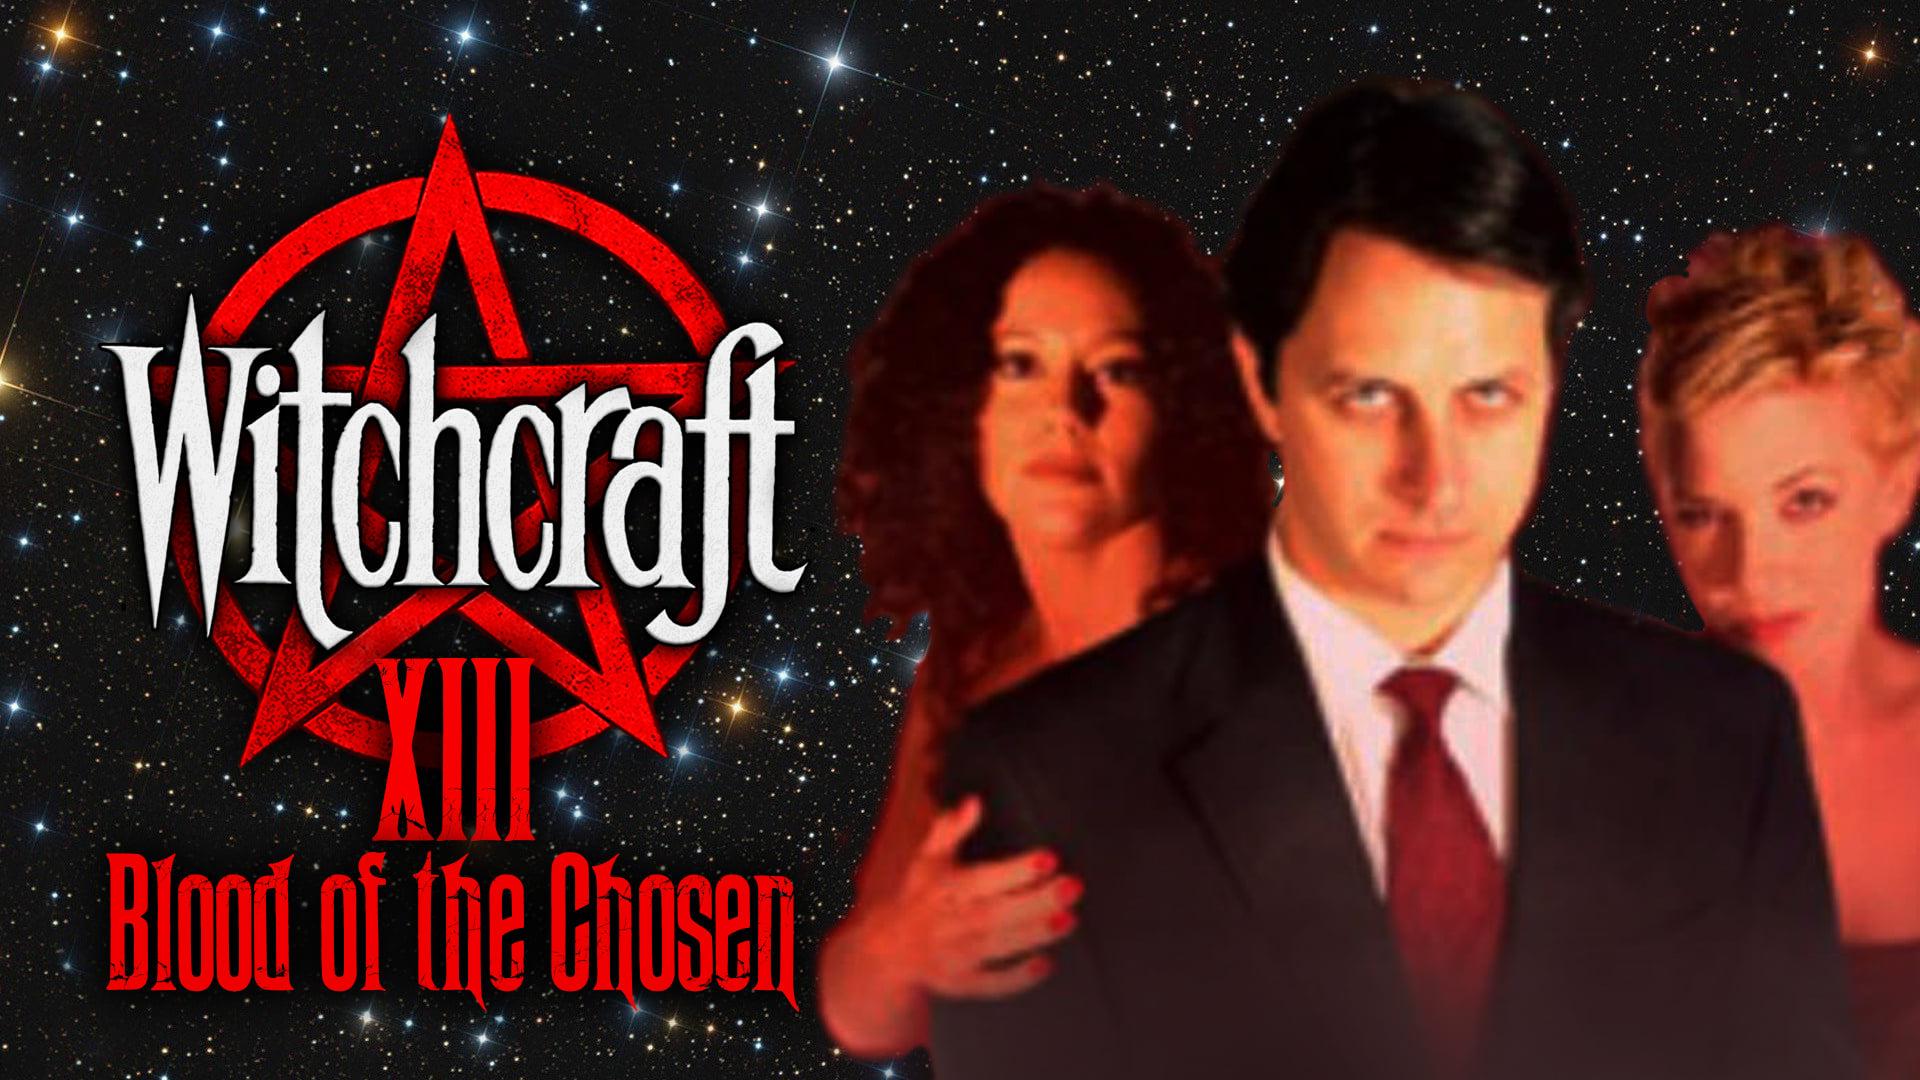 Witchcraft 13: Blood of the Chosen backdrop